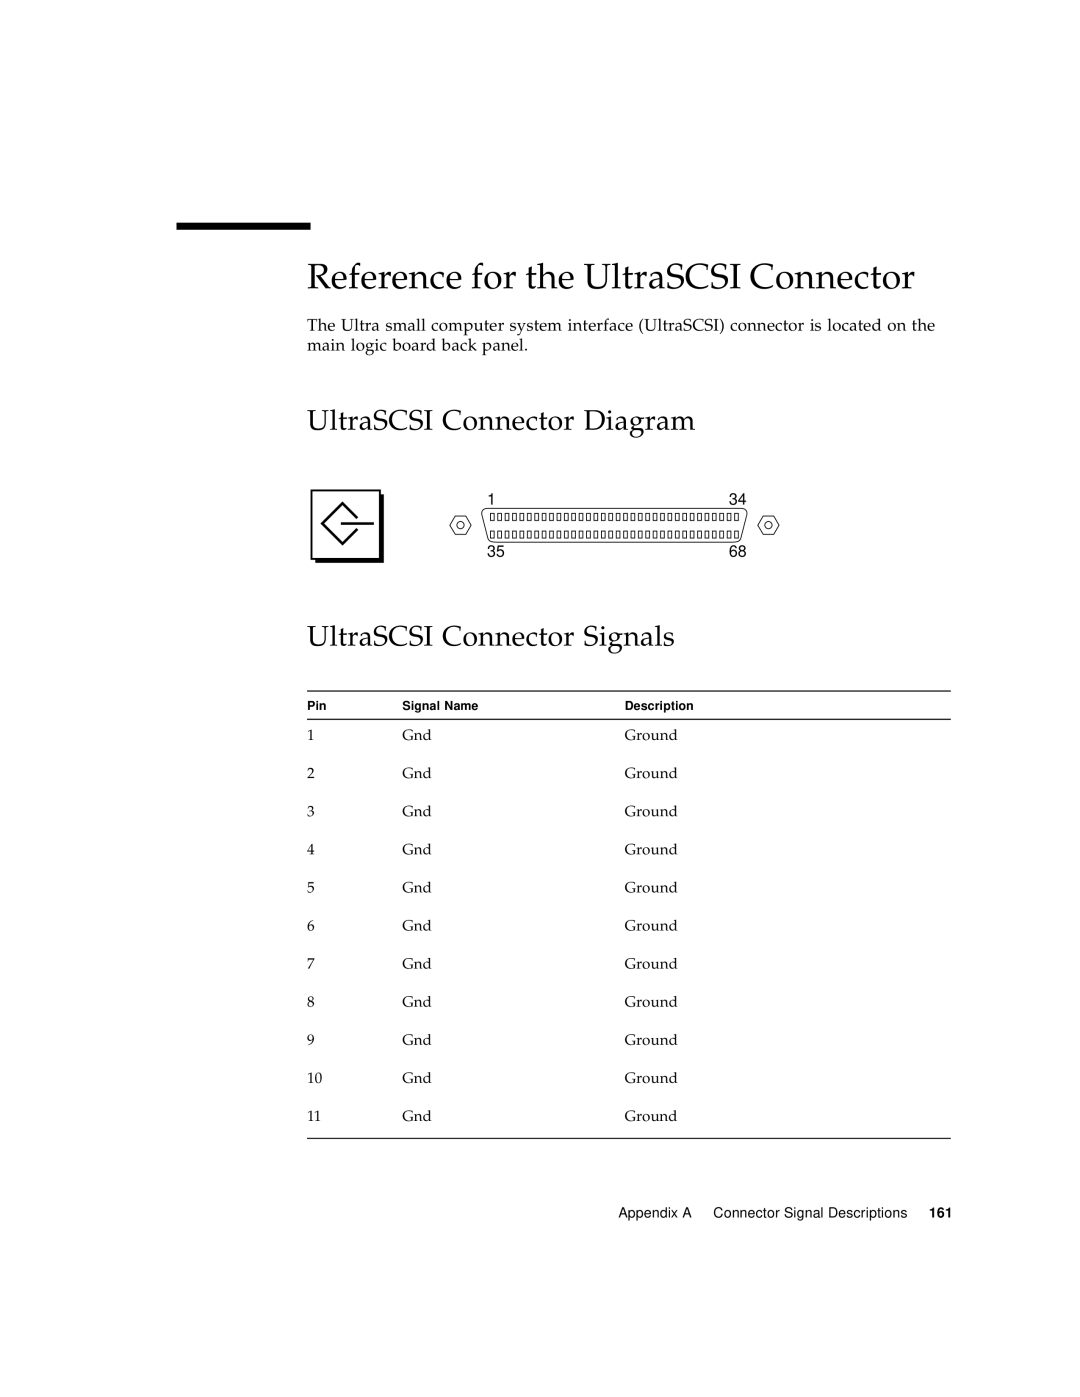 Sun Microsystems 220R Reference for the UltraSCSI Connector, UltraSCSI Connector Diagram, UltraSCSI Connector Signals 